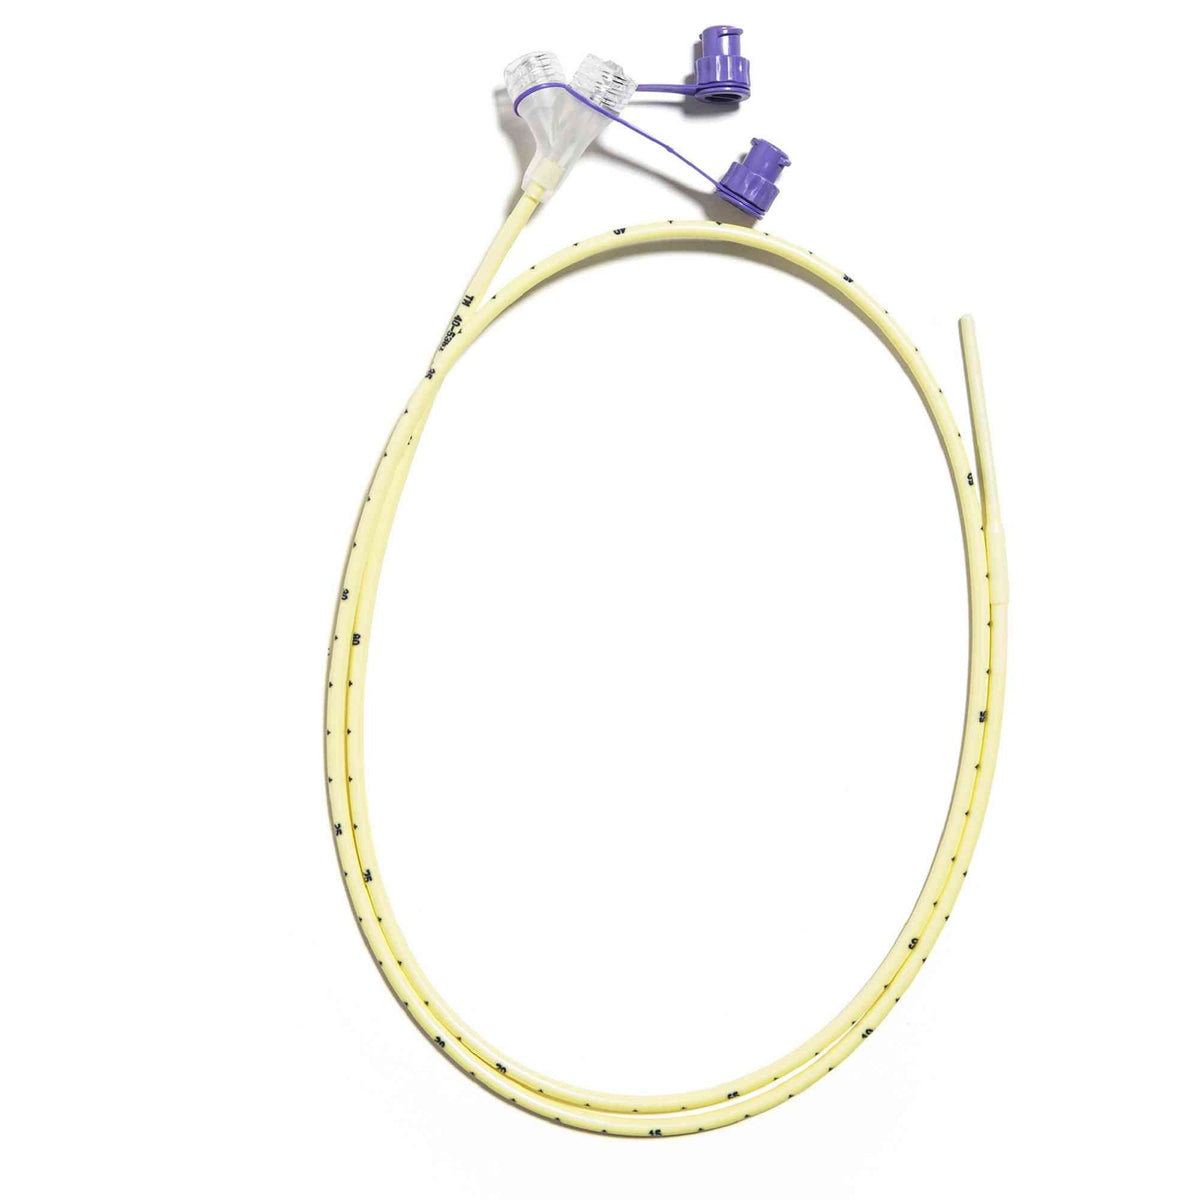 Halyard CORFLO Nasogastric Feeding Tube without Stylet, with ENFIT Connector, 6Fr, 36" (40-1366)